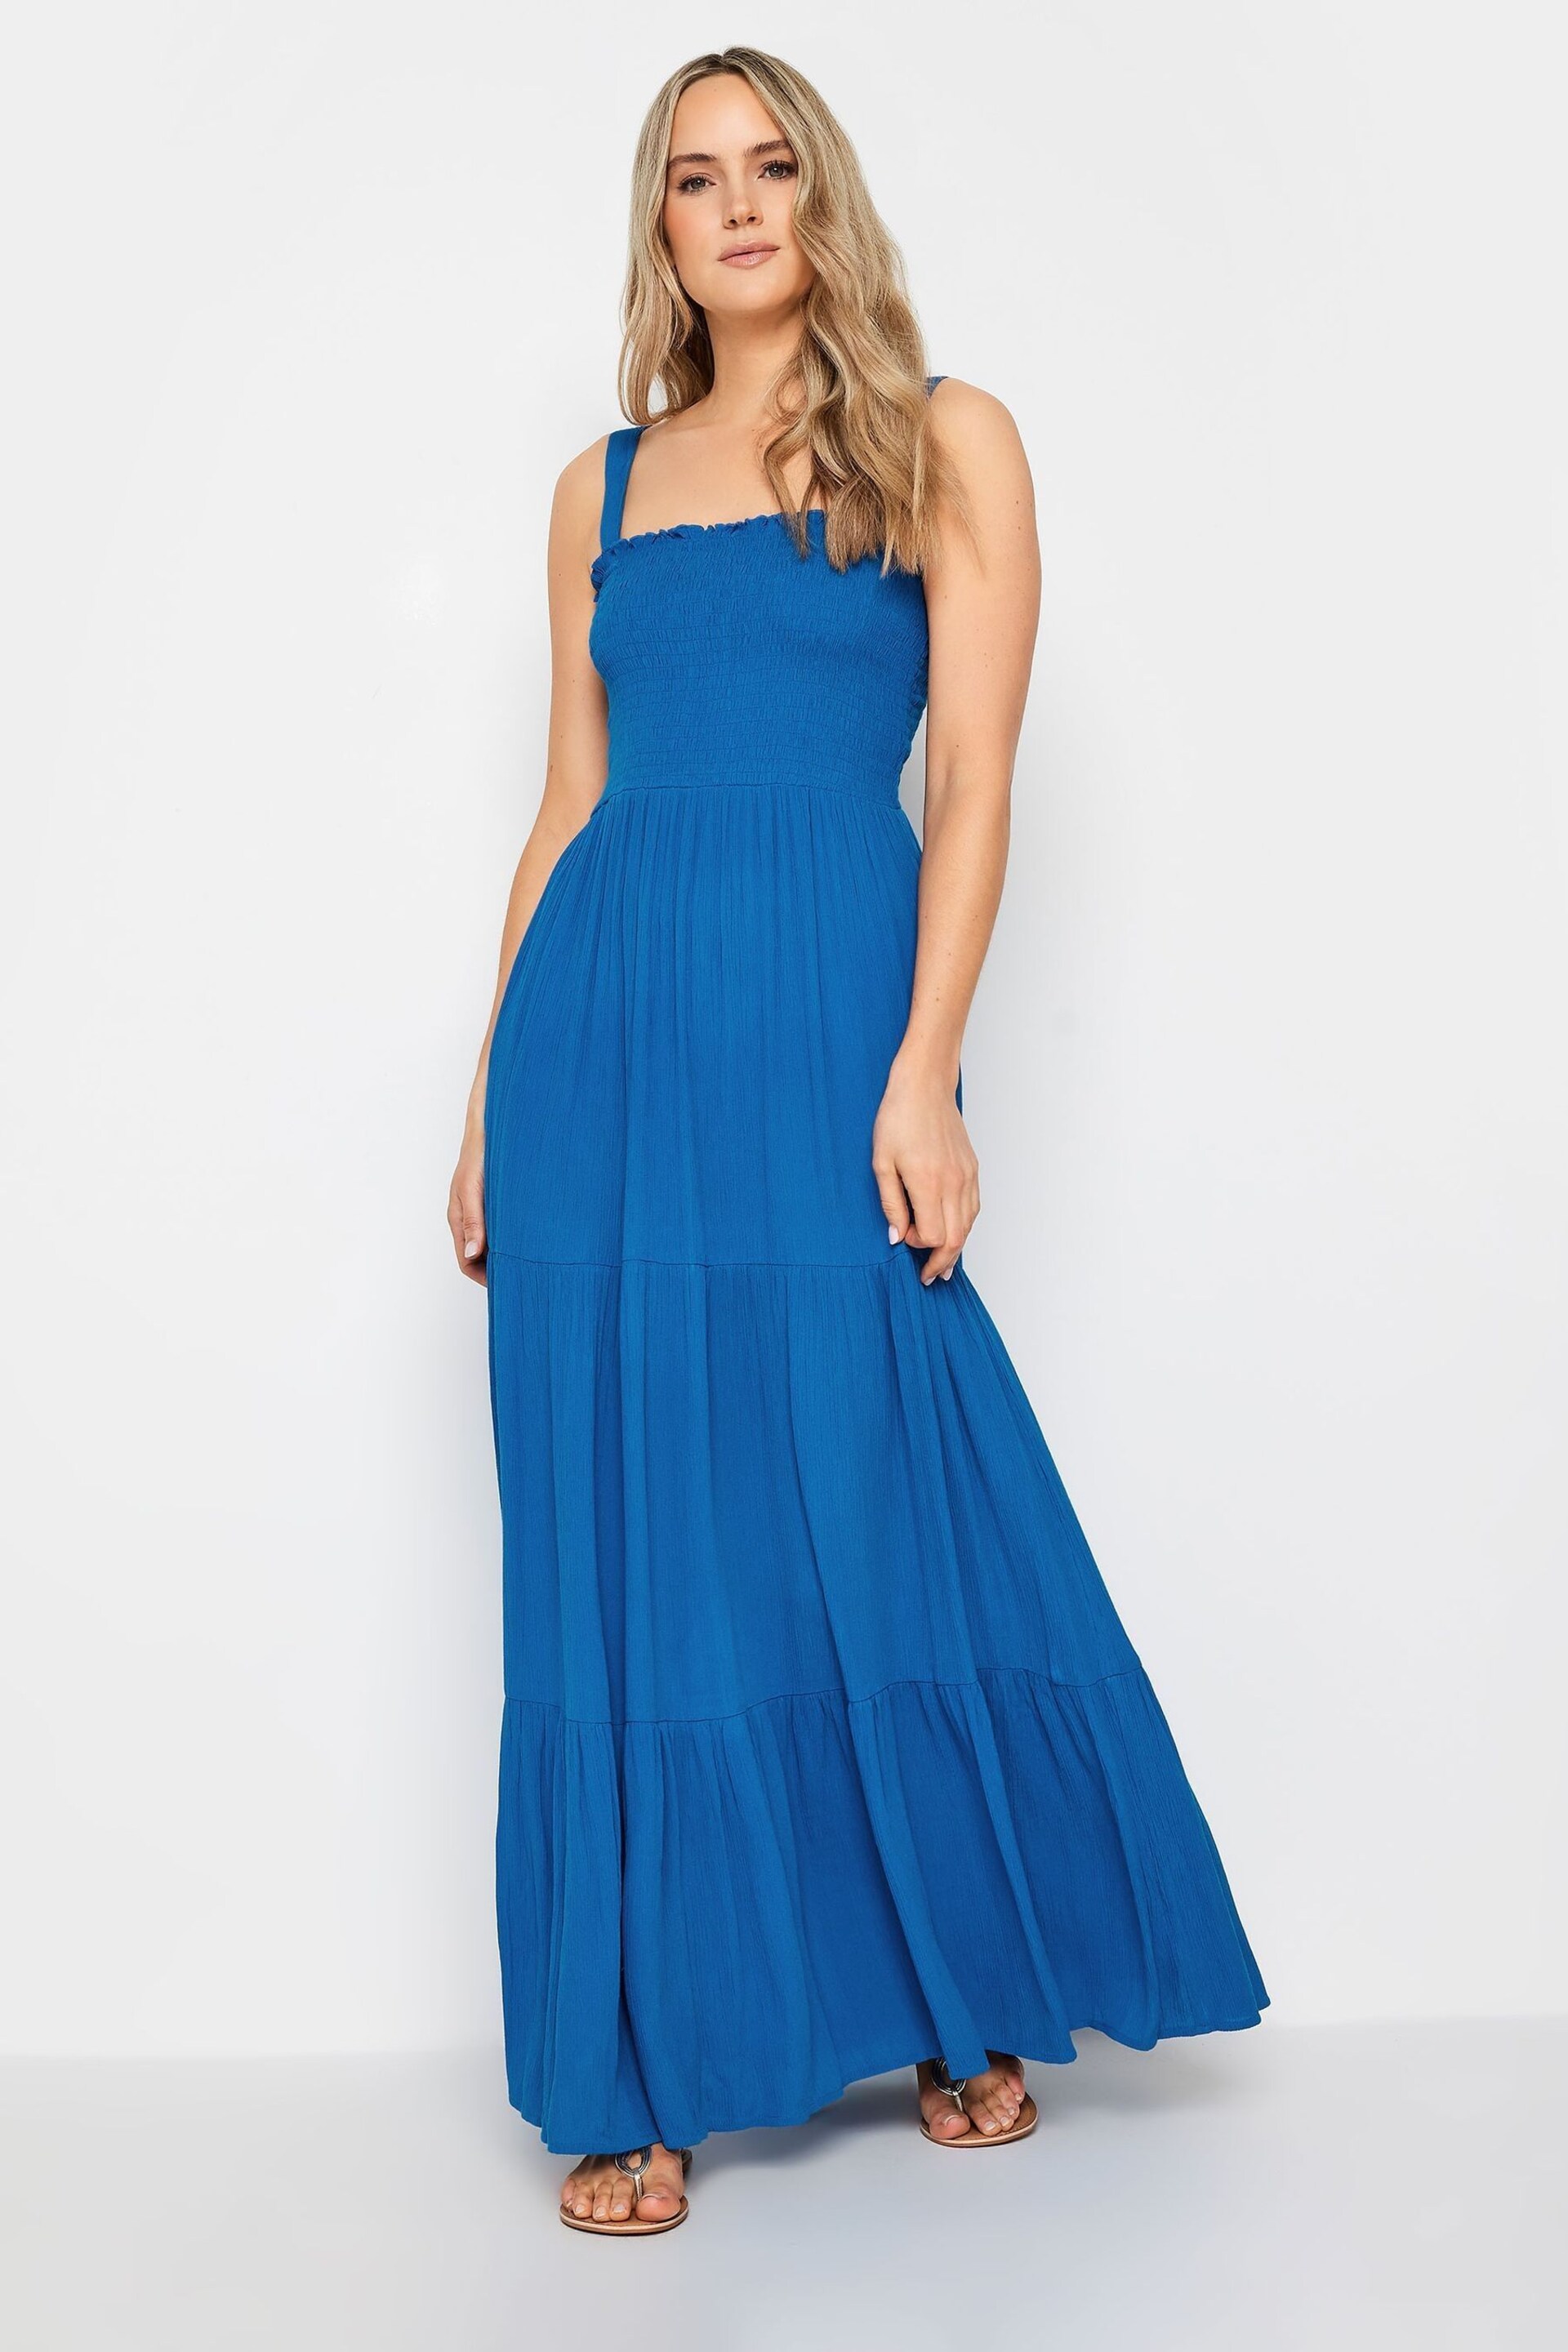 Long Tall Sally Blue Crinkle Tiered Dress - Image 2 of 5